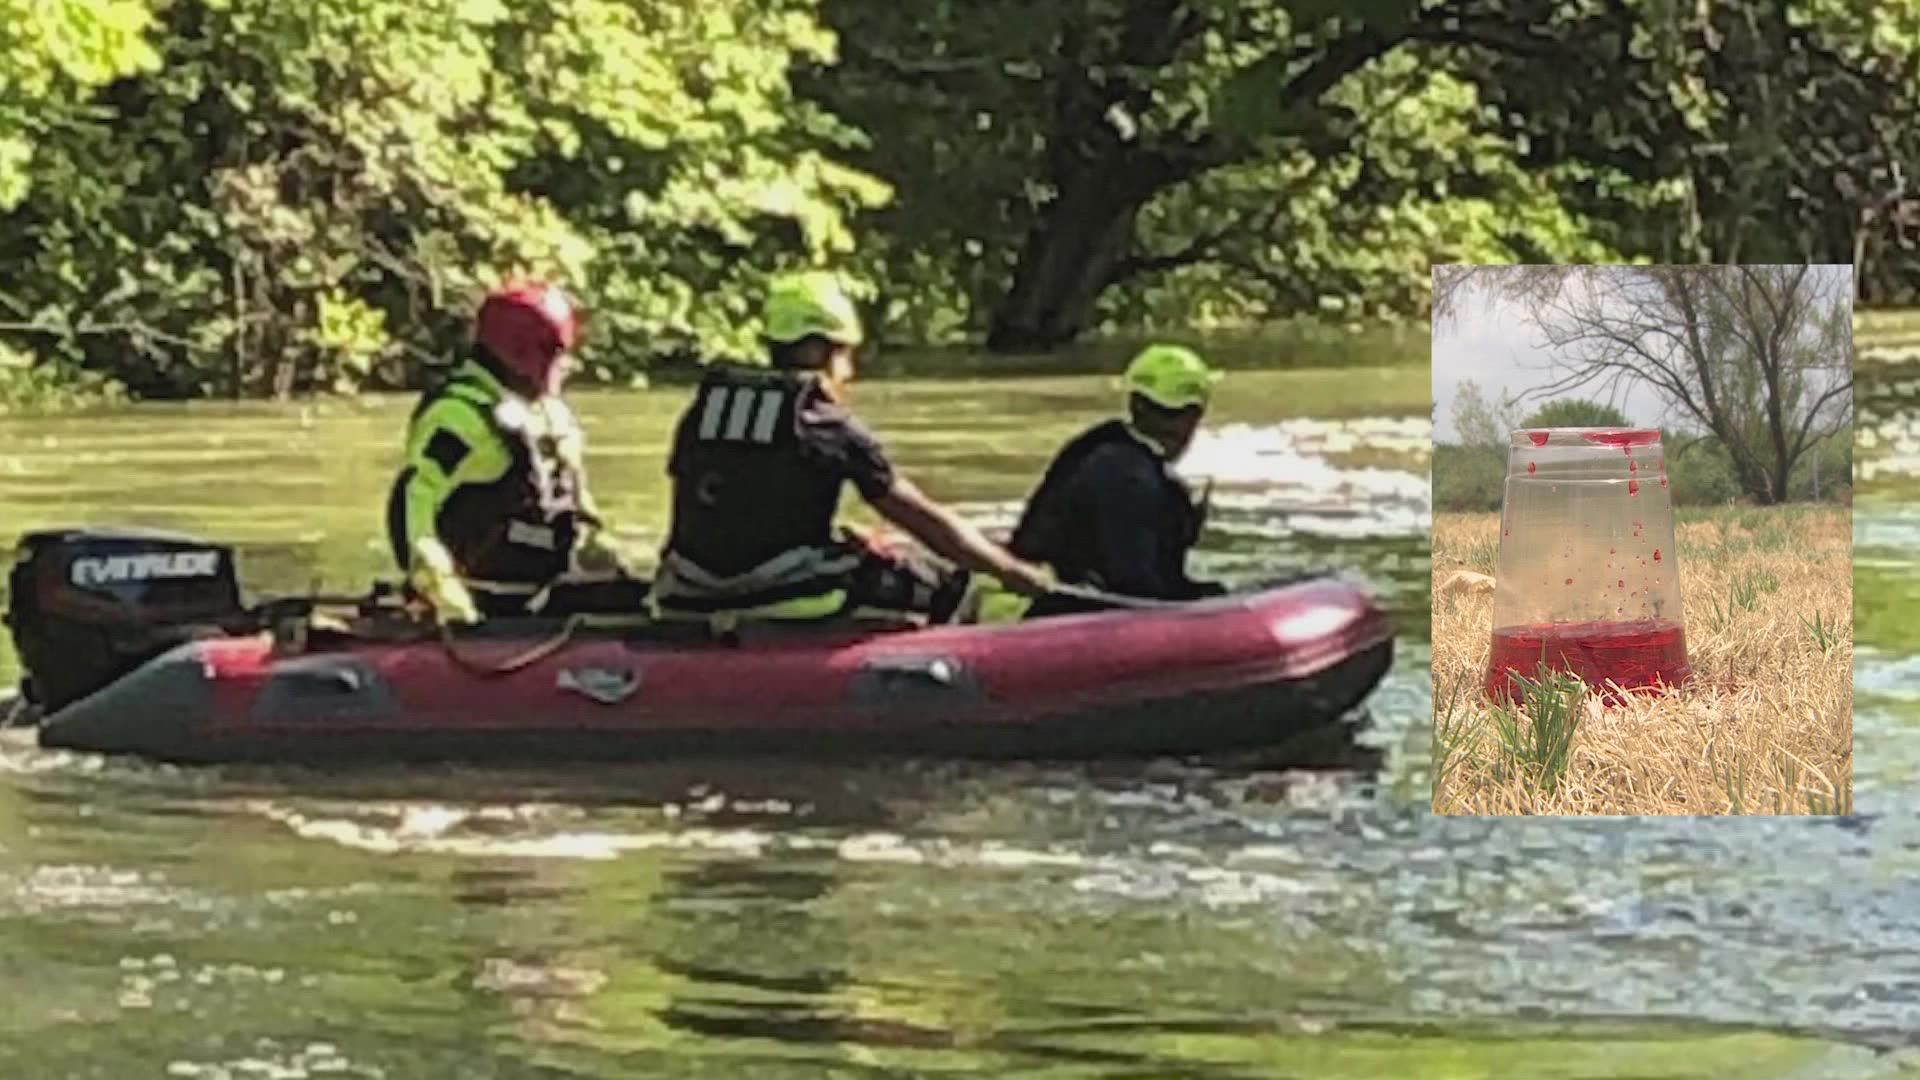 “It only takes about six inches of moving water to sweep an adult off their feet and carry them down stream,” GPFD Battalion Chief Joe Harvey said.